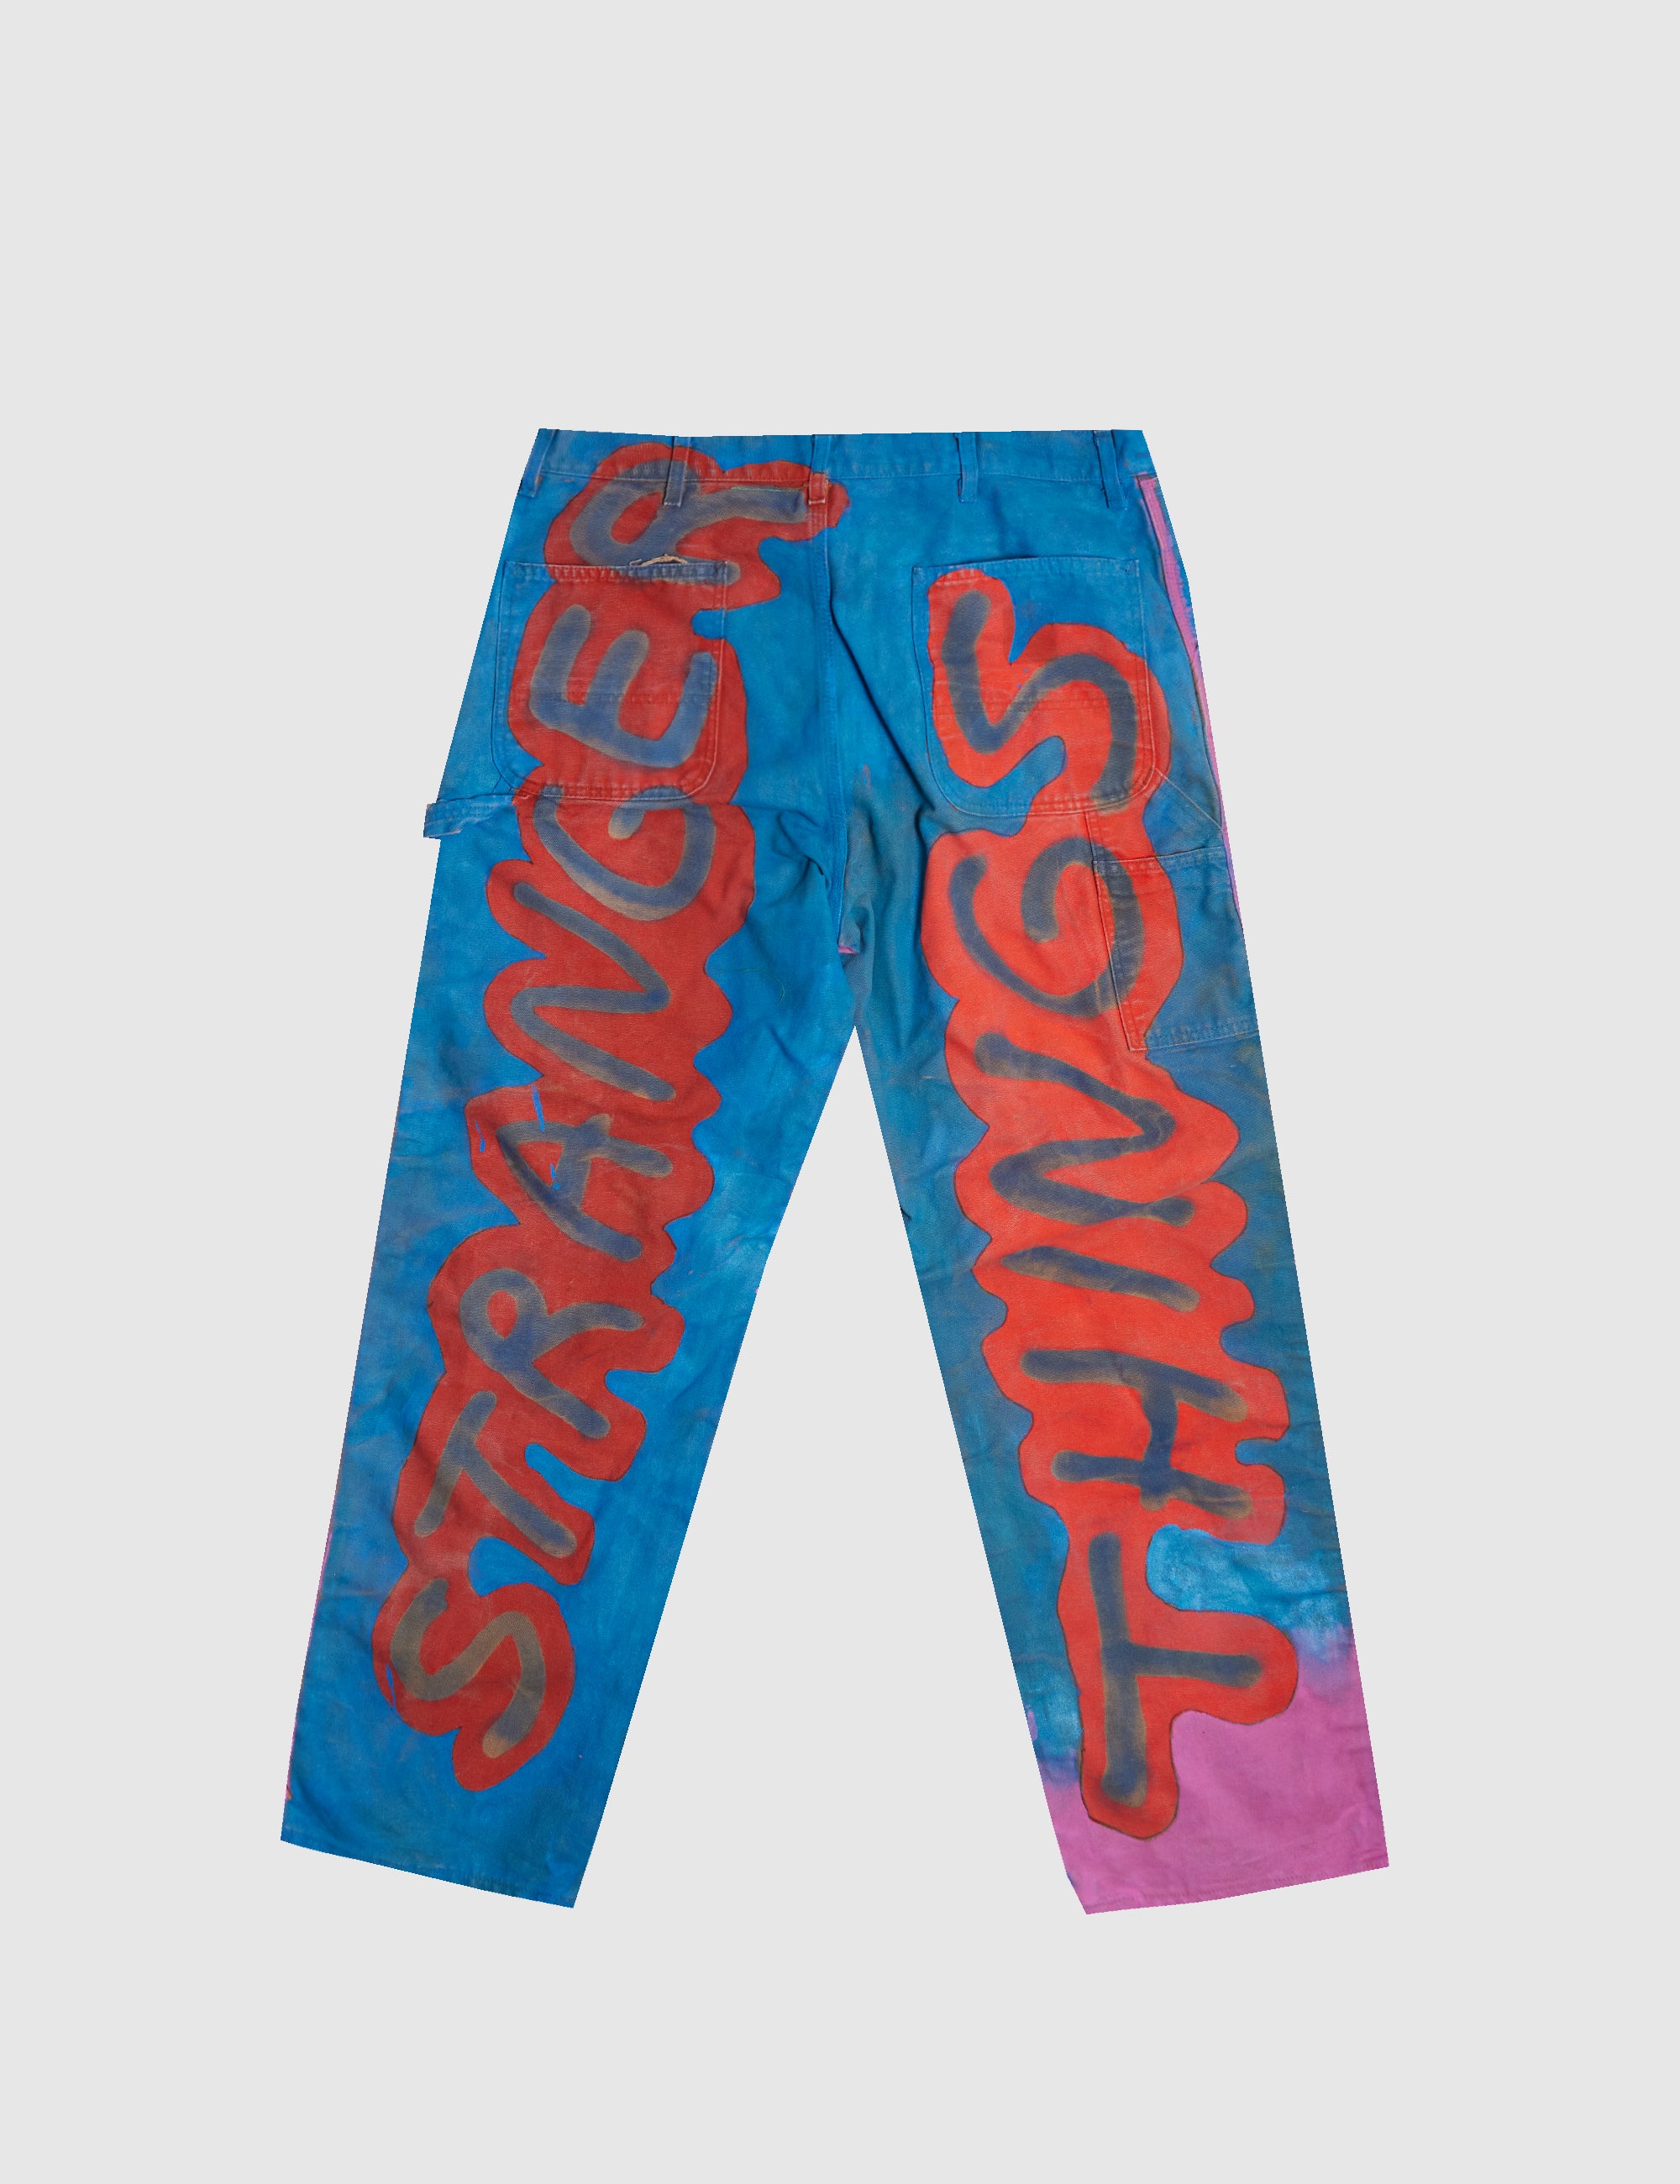 Exclusive Stranger Things Upcycled Stefan Meier Pants 13 - 40x32